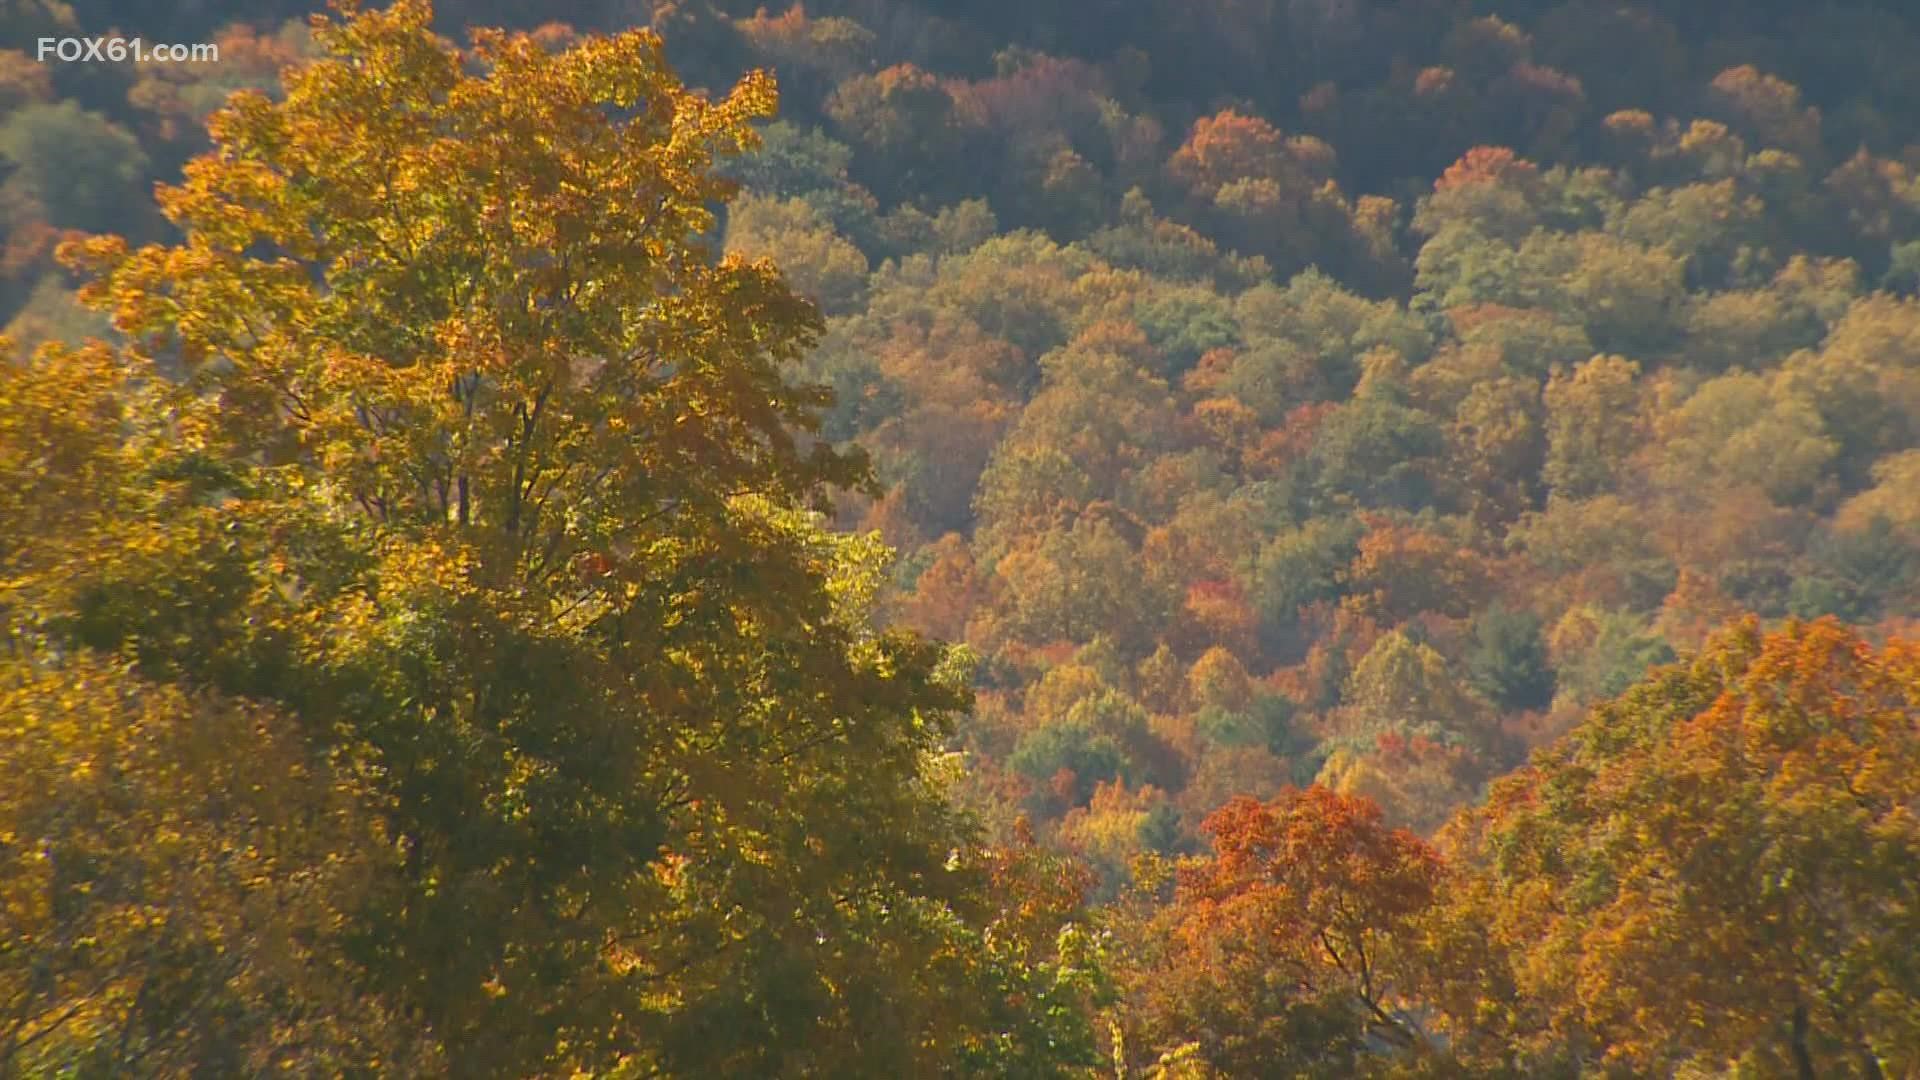 Foliage season looks promising and that means a boost for area attractions.